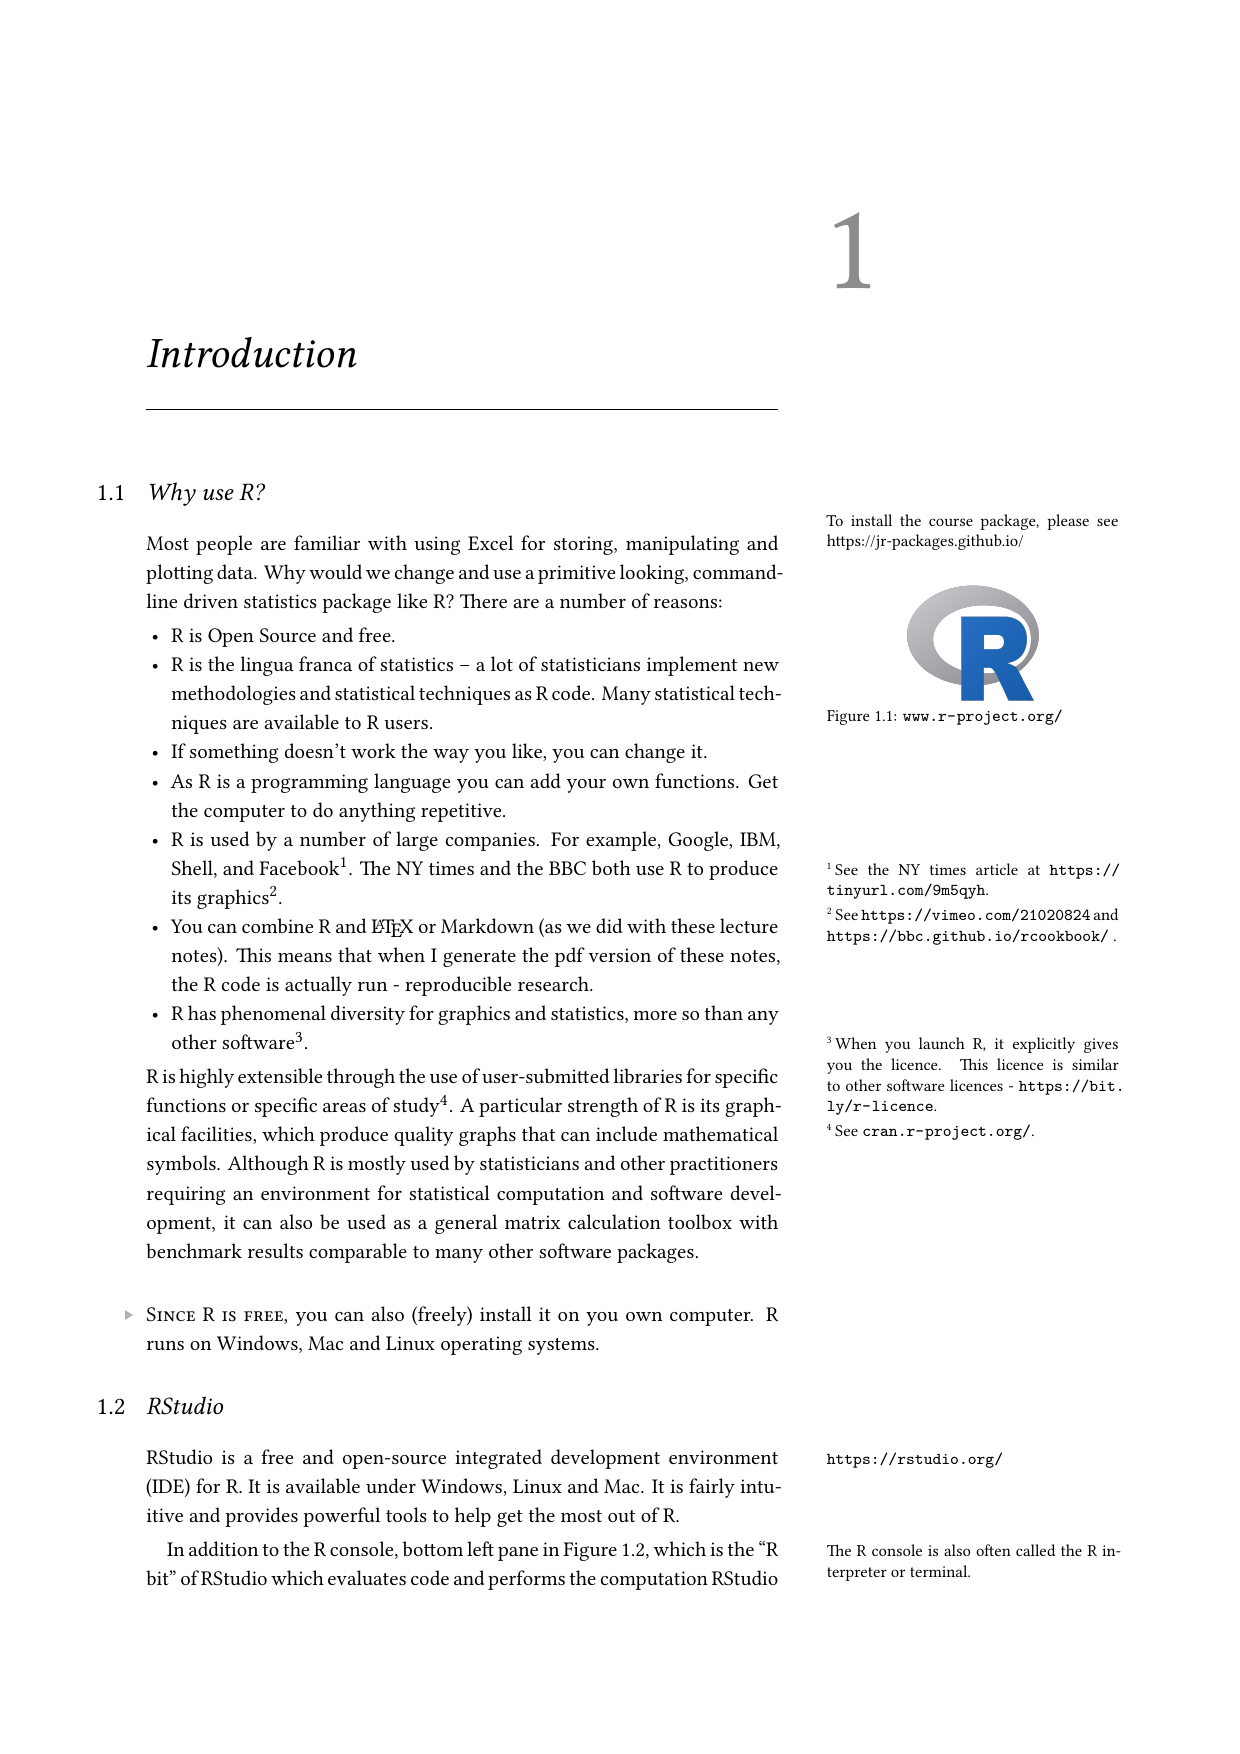 Example course material for 'Introduction to R